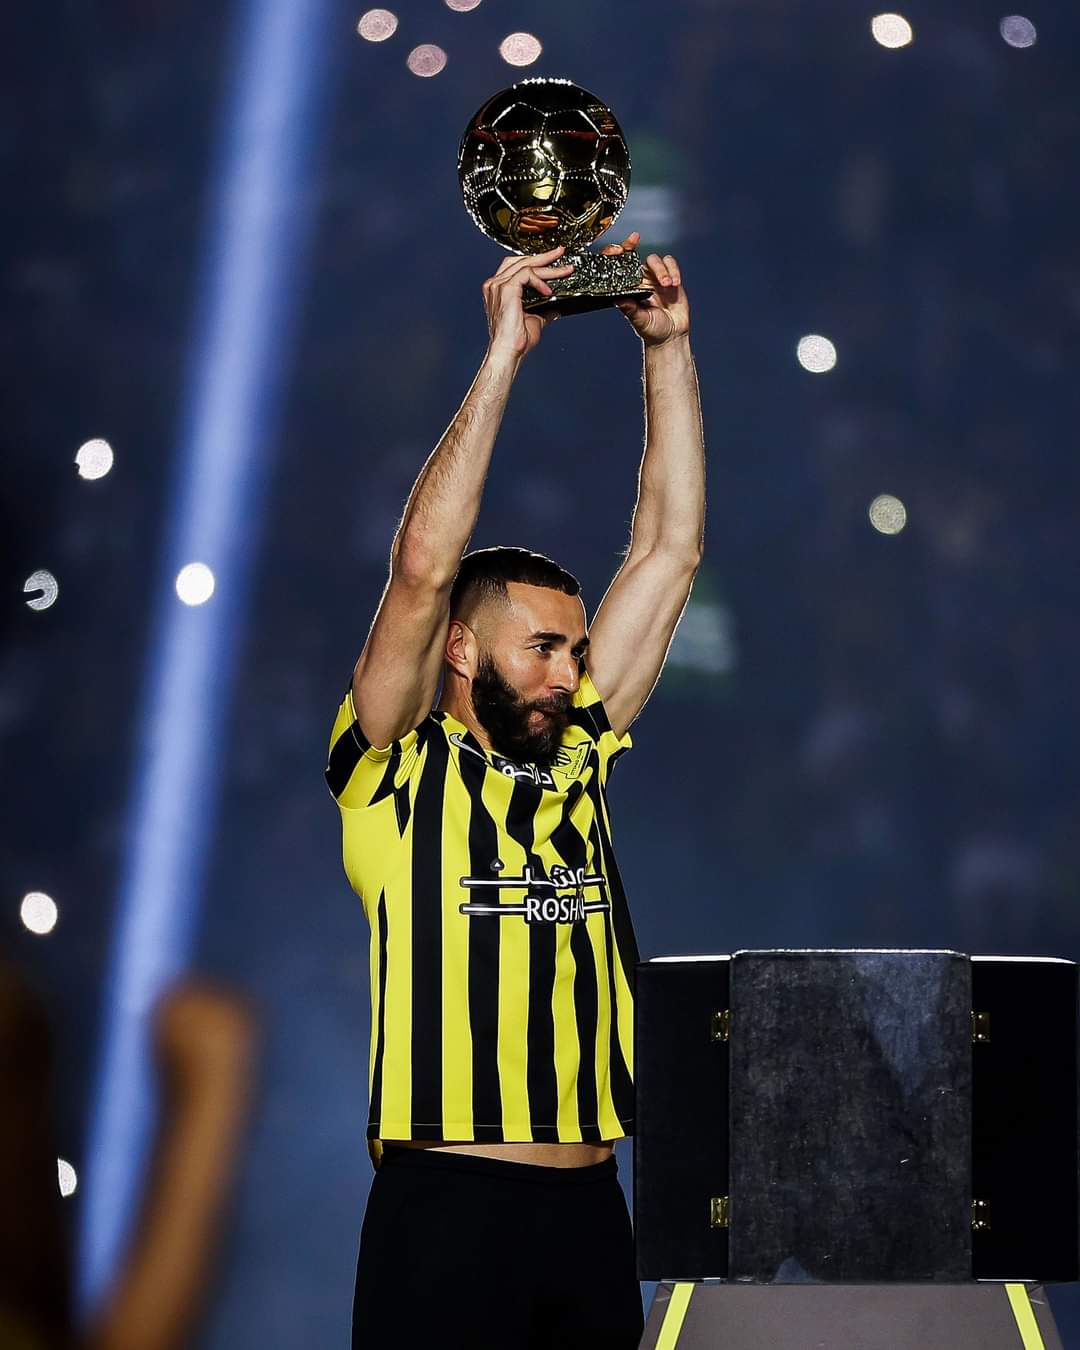 Karim Benzema unveiled at Al-Itihad as he came with his Ballon d’Or trophy